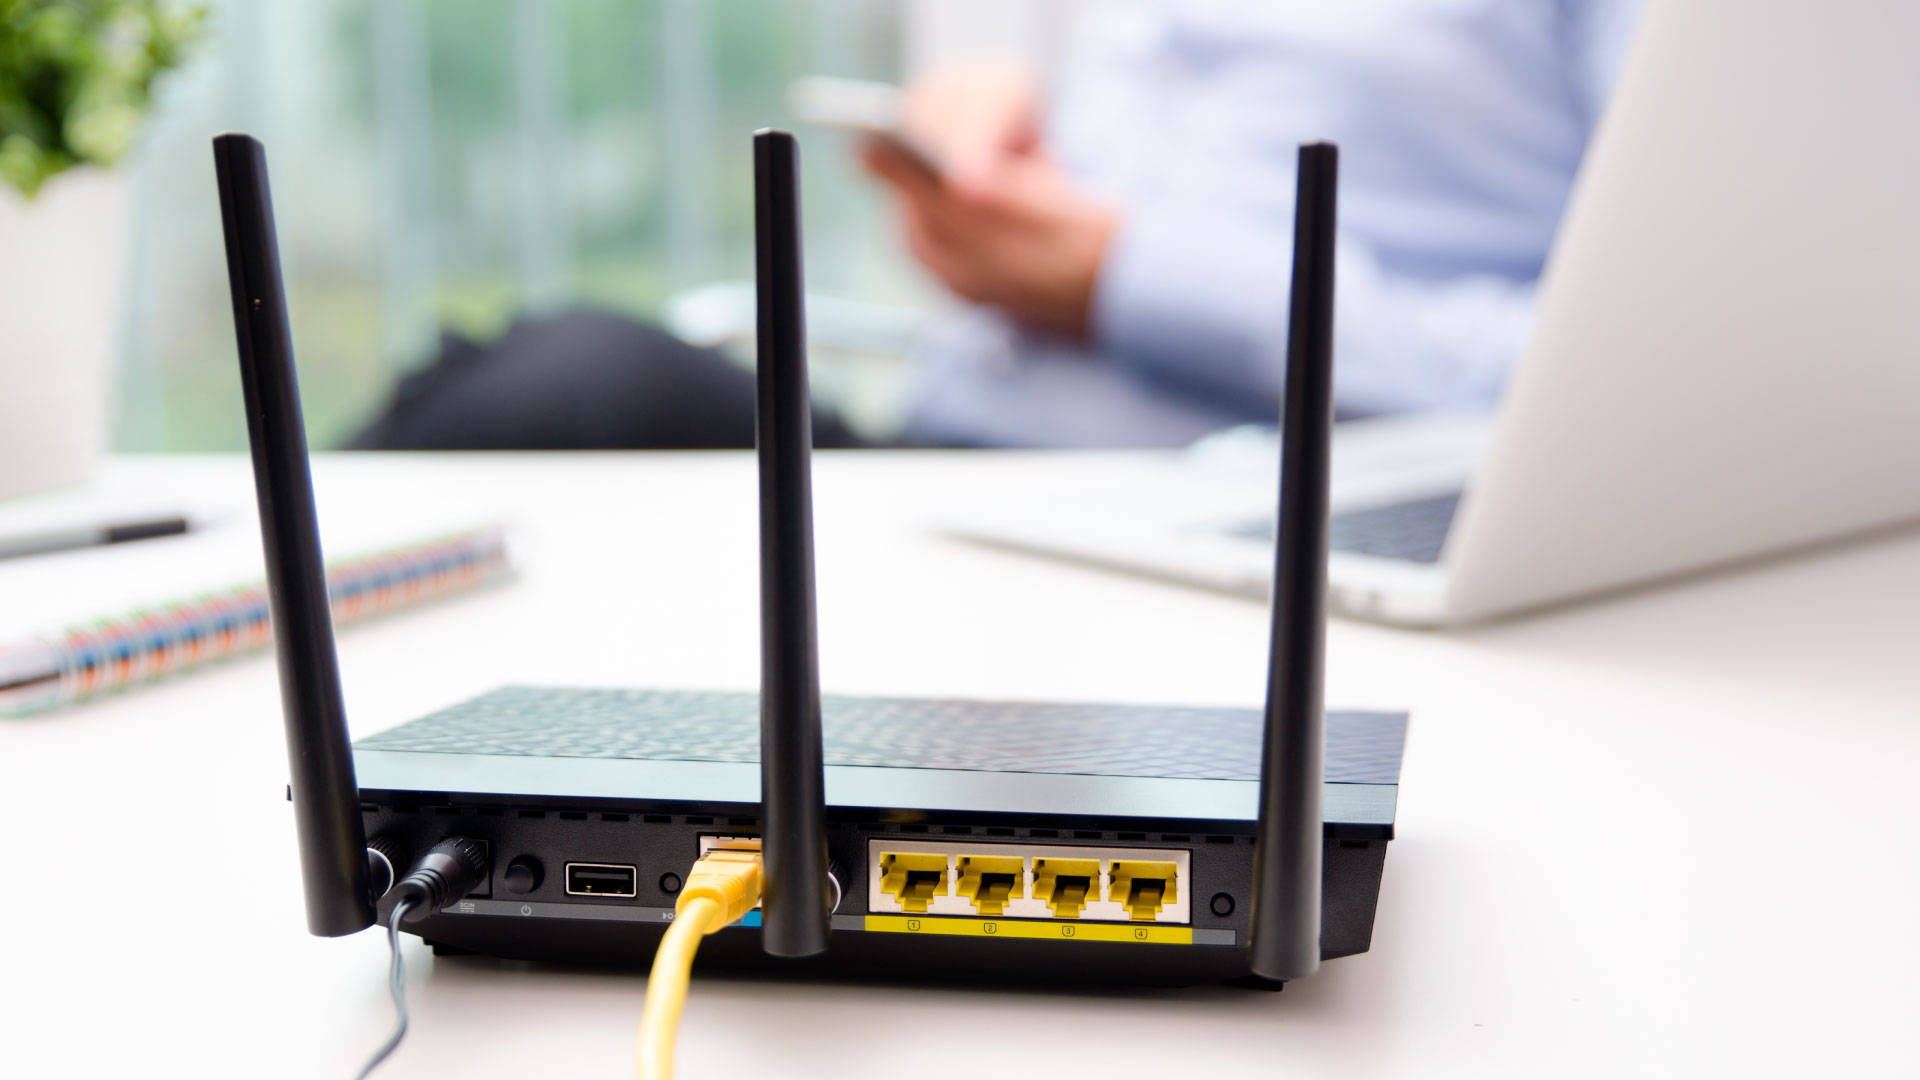 A wireless router on a desk with a man using his phone in the background.